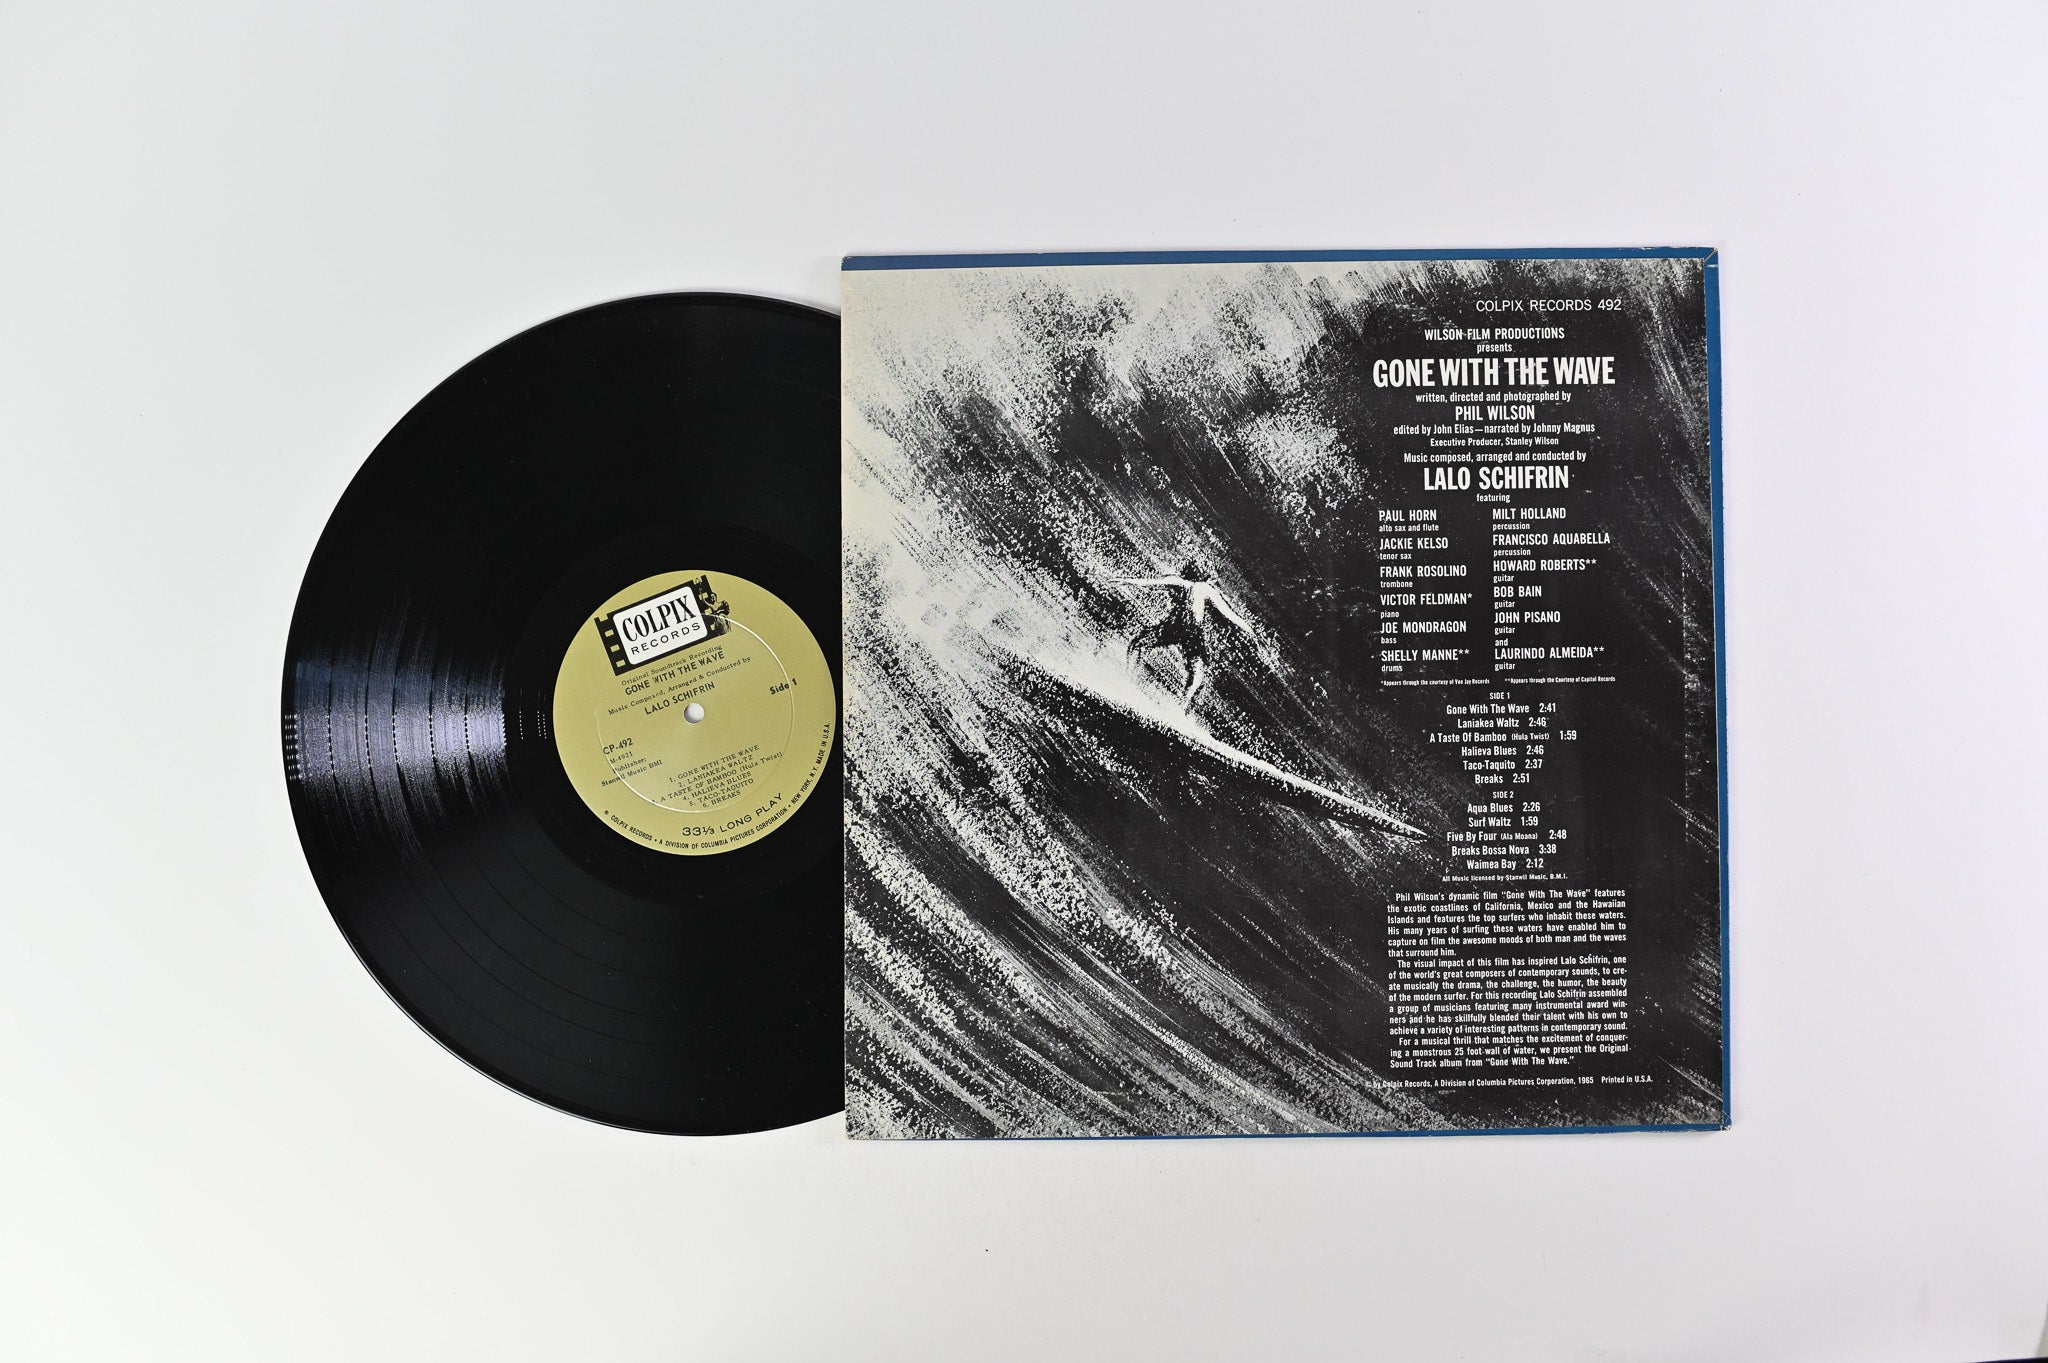 Lalo Schifrin - Gone With the Wave on Colpix Records